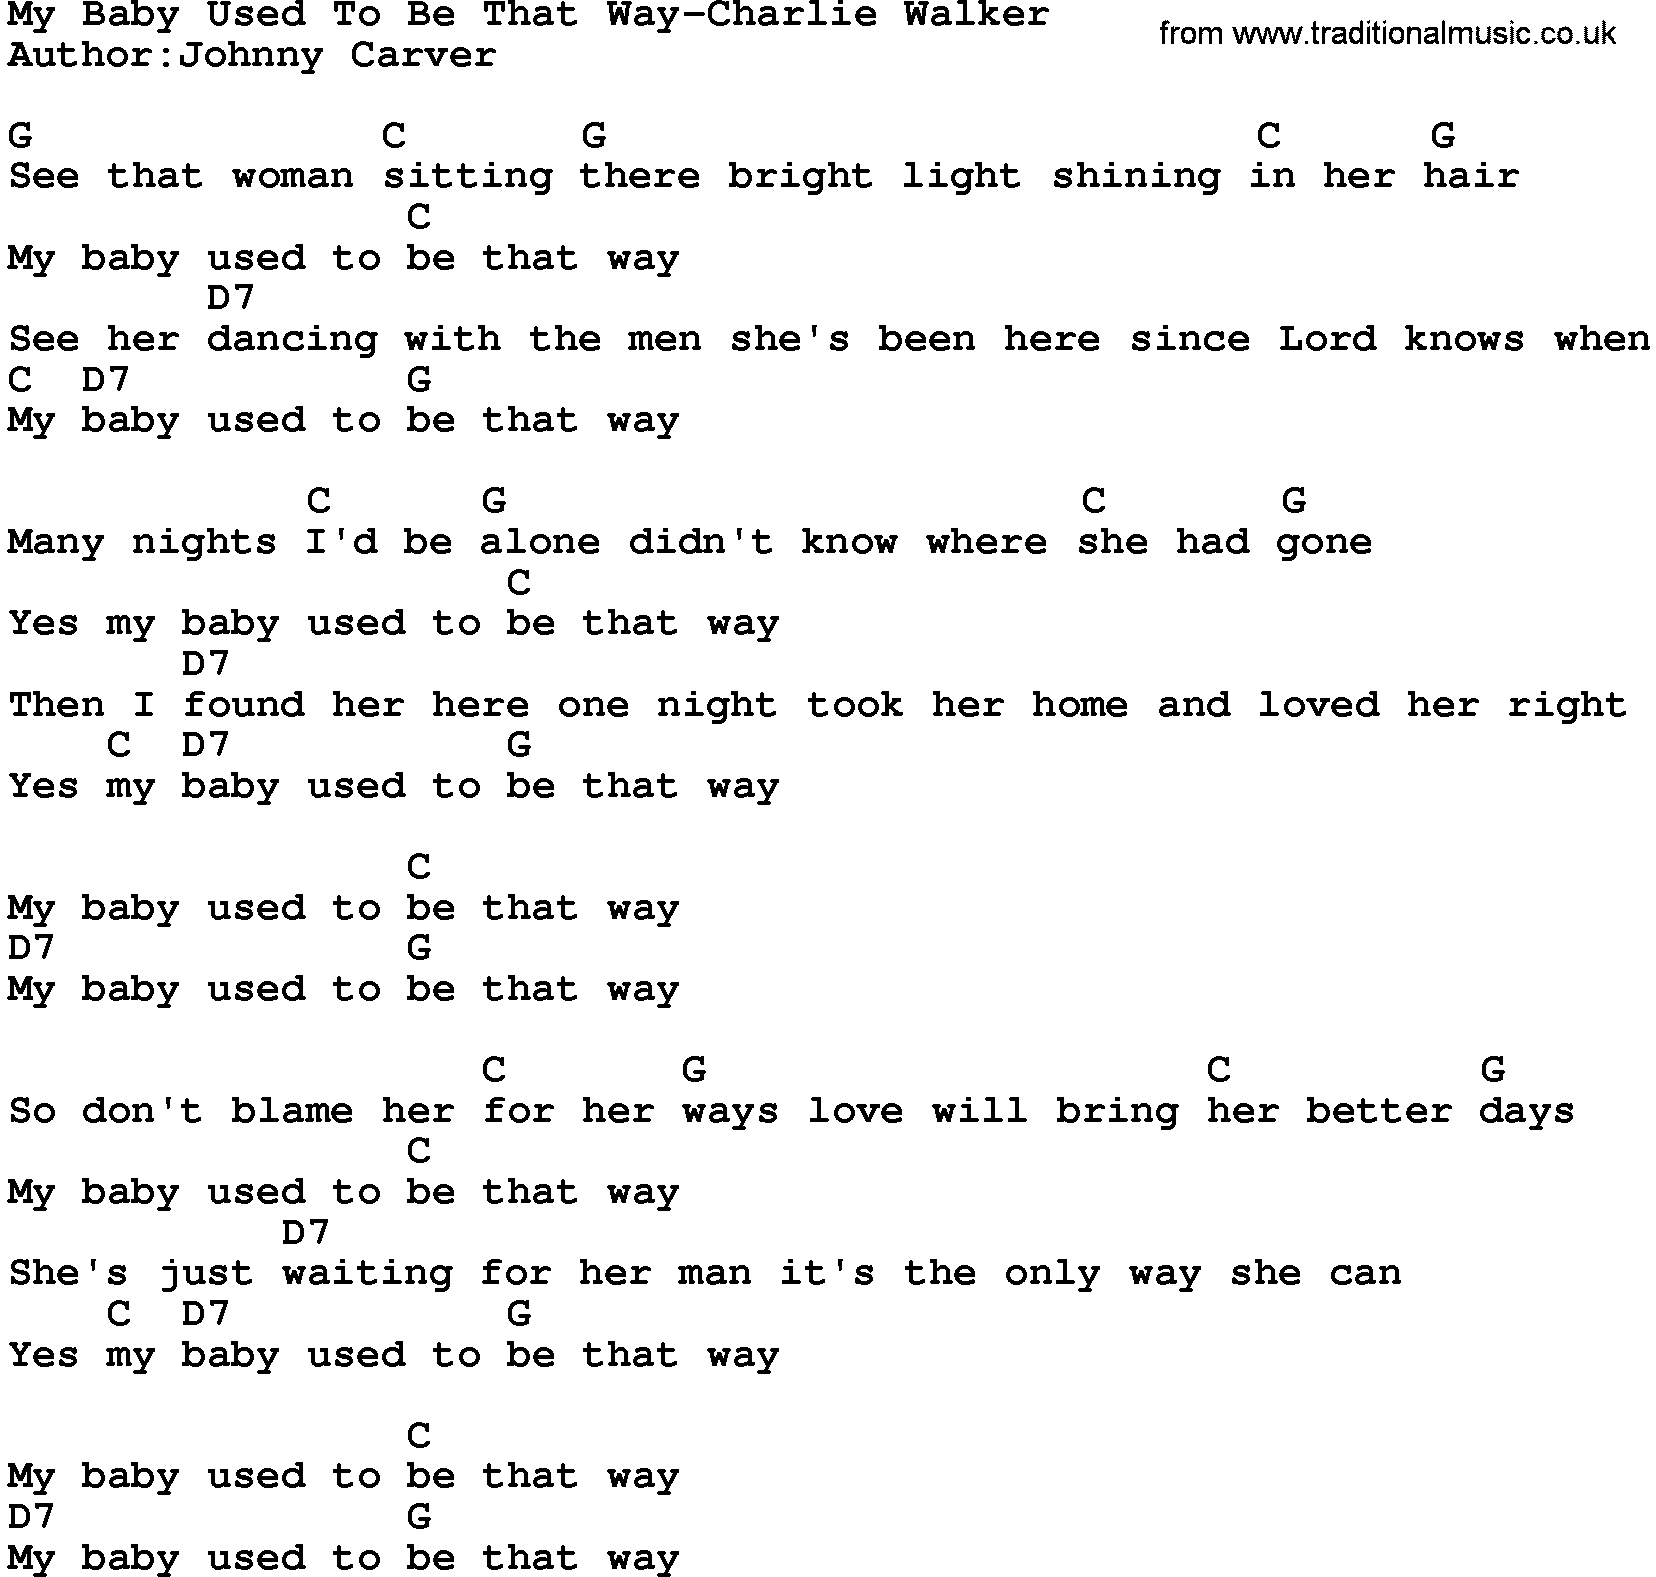 Country music song: My Baby Used To Be That Way-Charlie Walker lyrics and chords